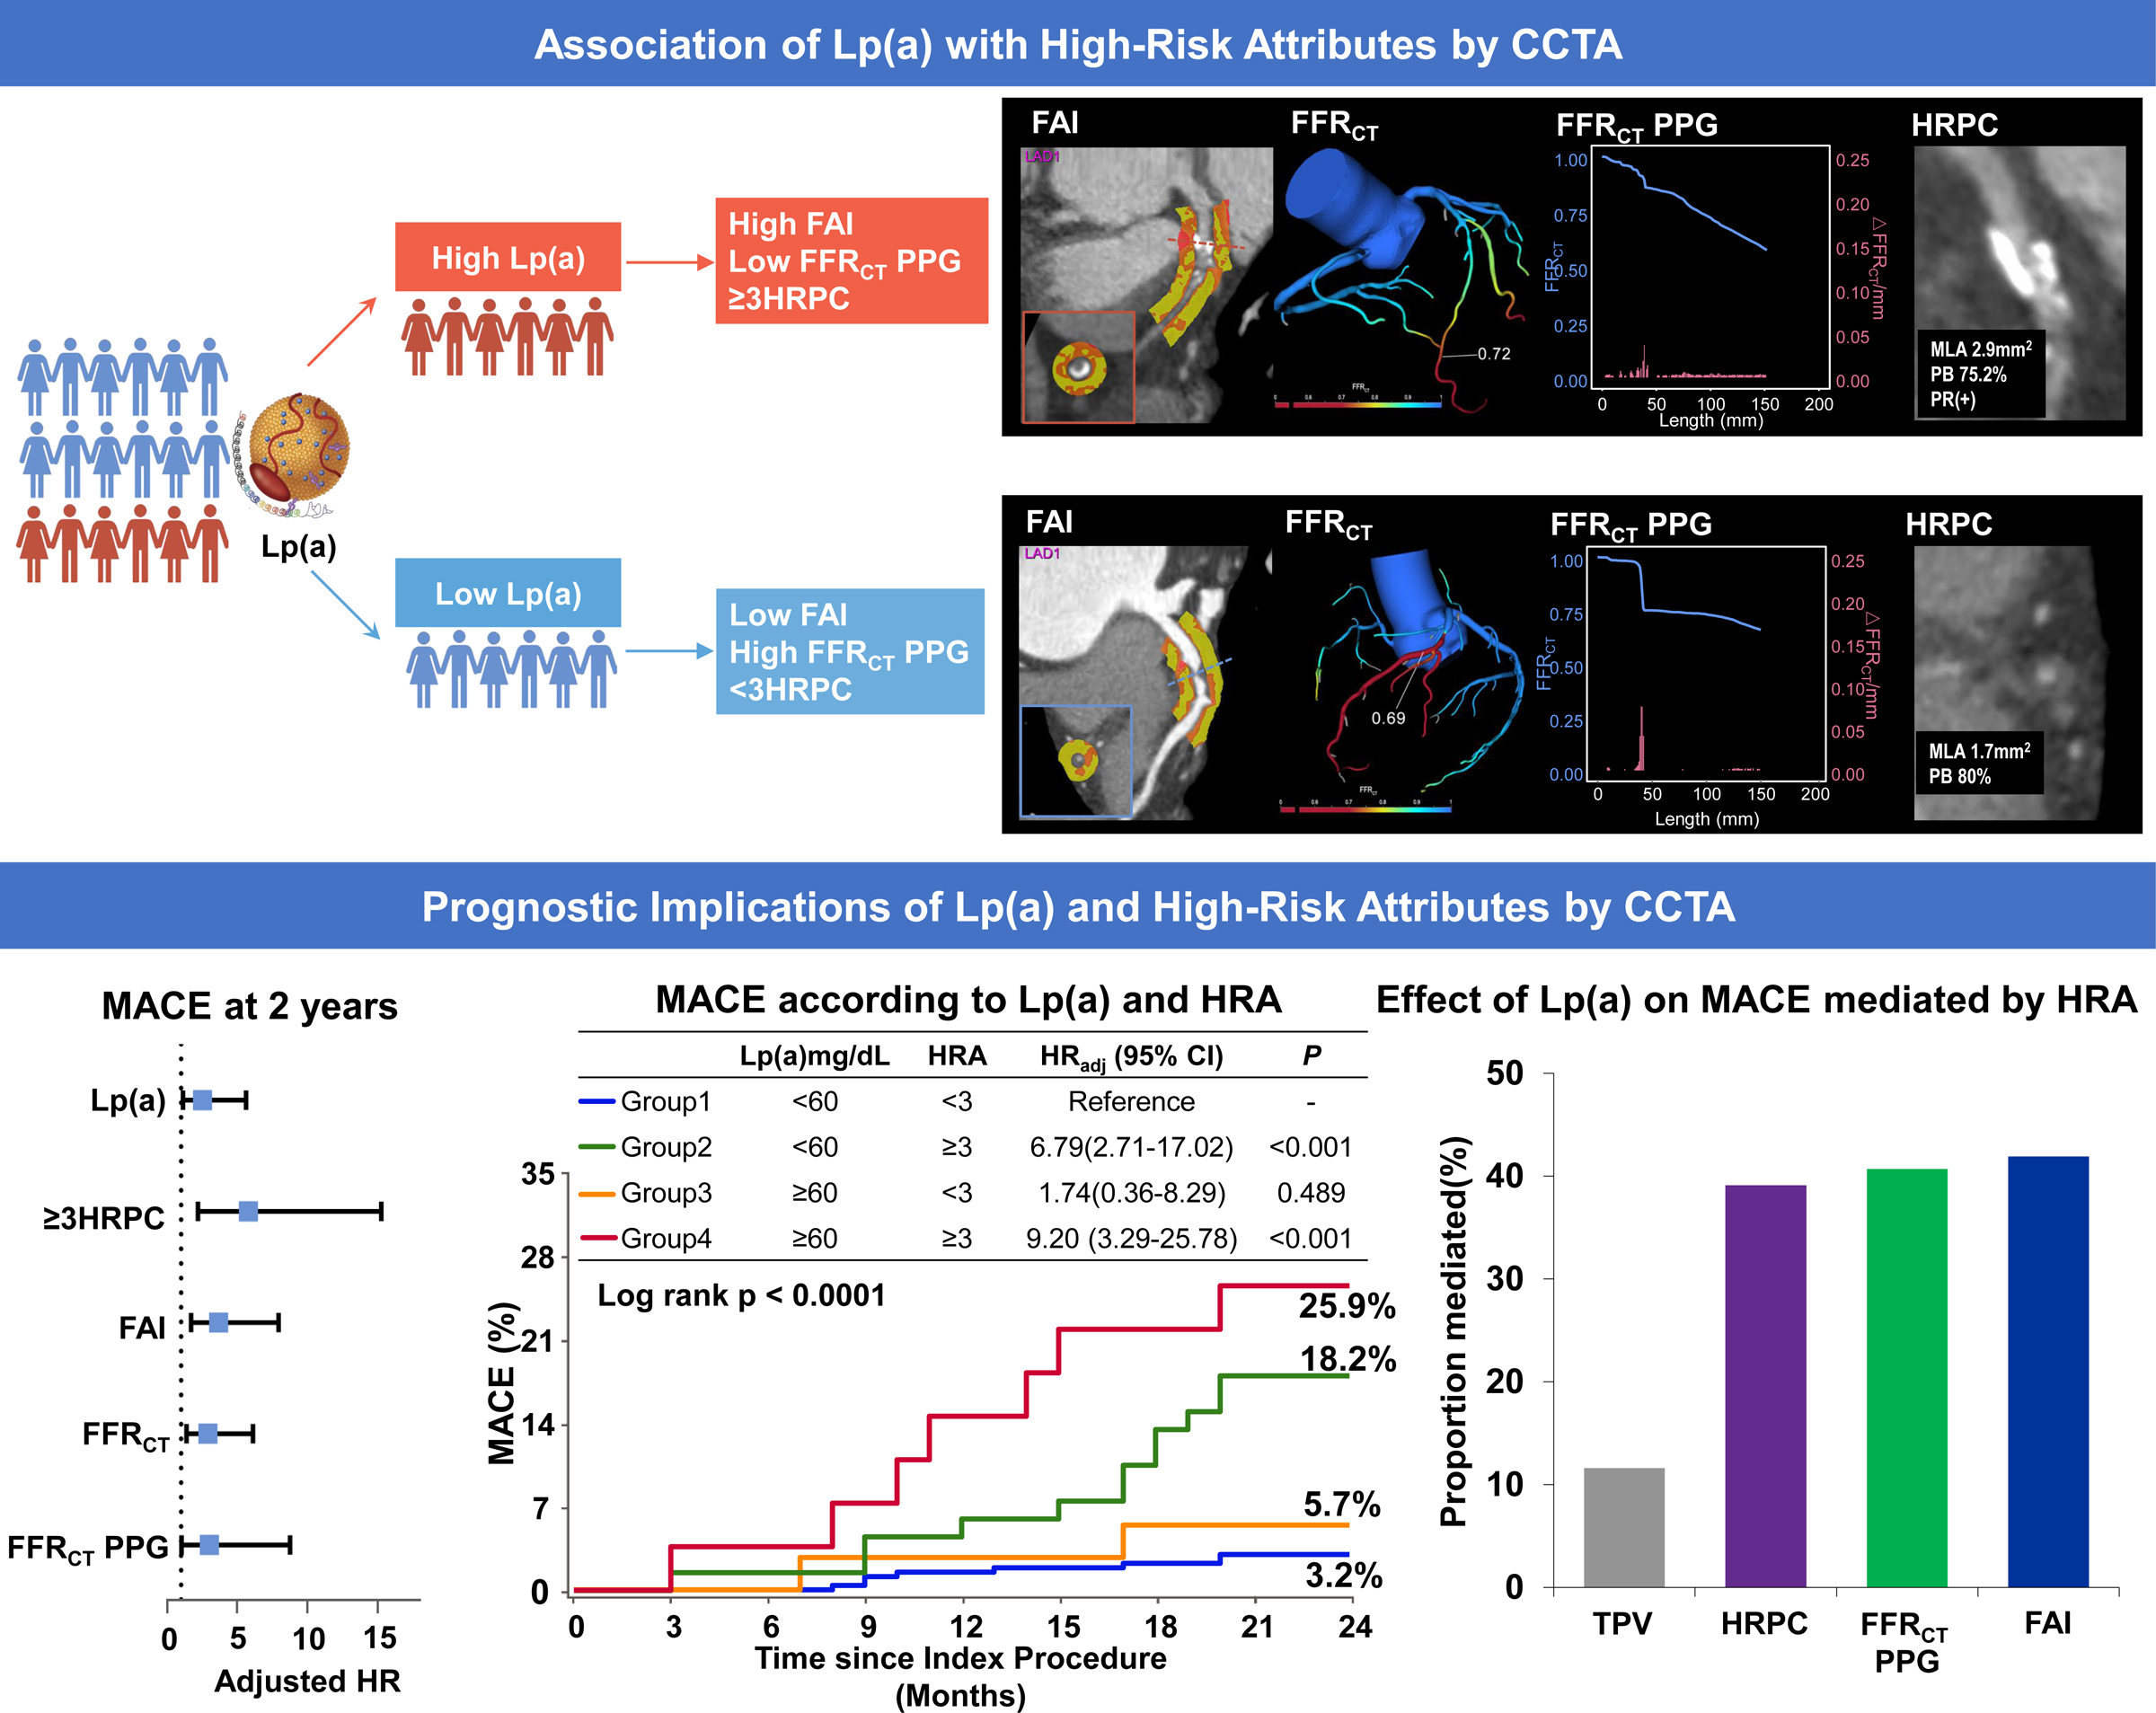 Association of Lipoprotein (a) With Coronary-Computed Tomography Angiography–Assessed High-Risk Coronary Disease Attributes and Cardiovascular Outcomes